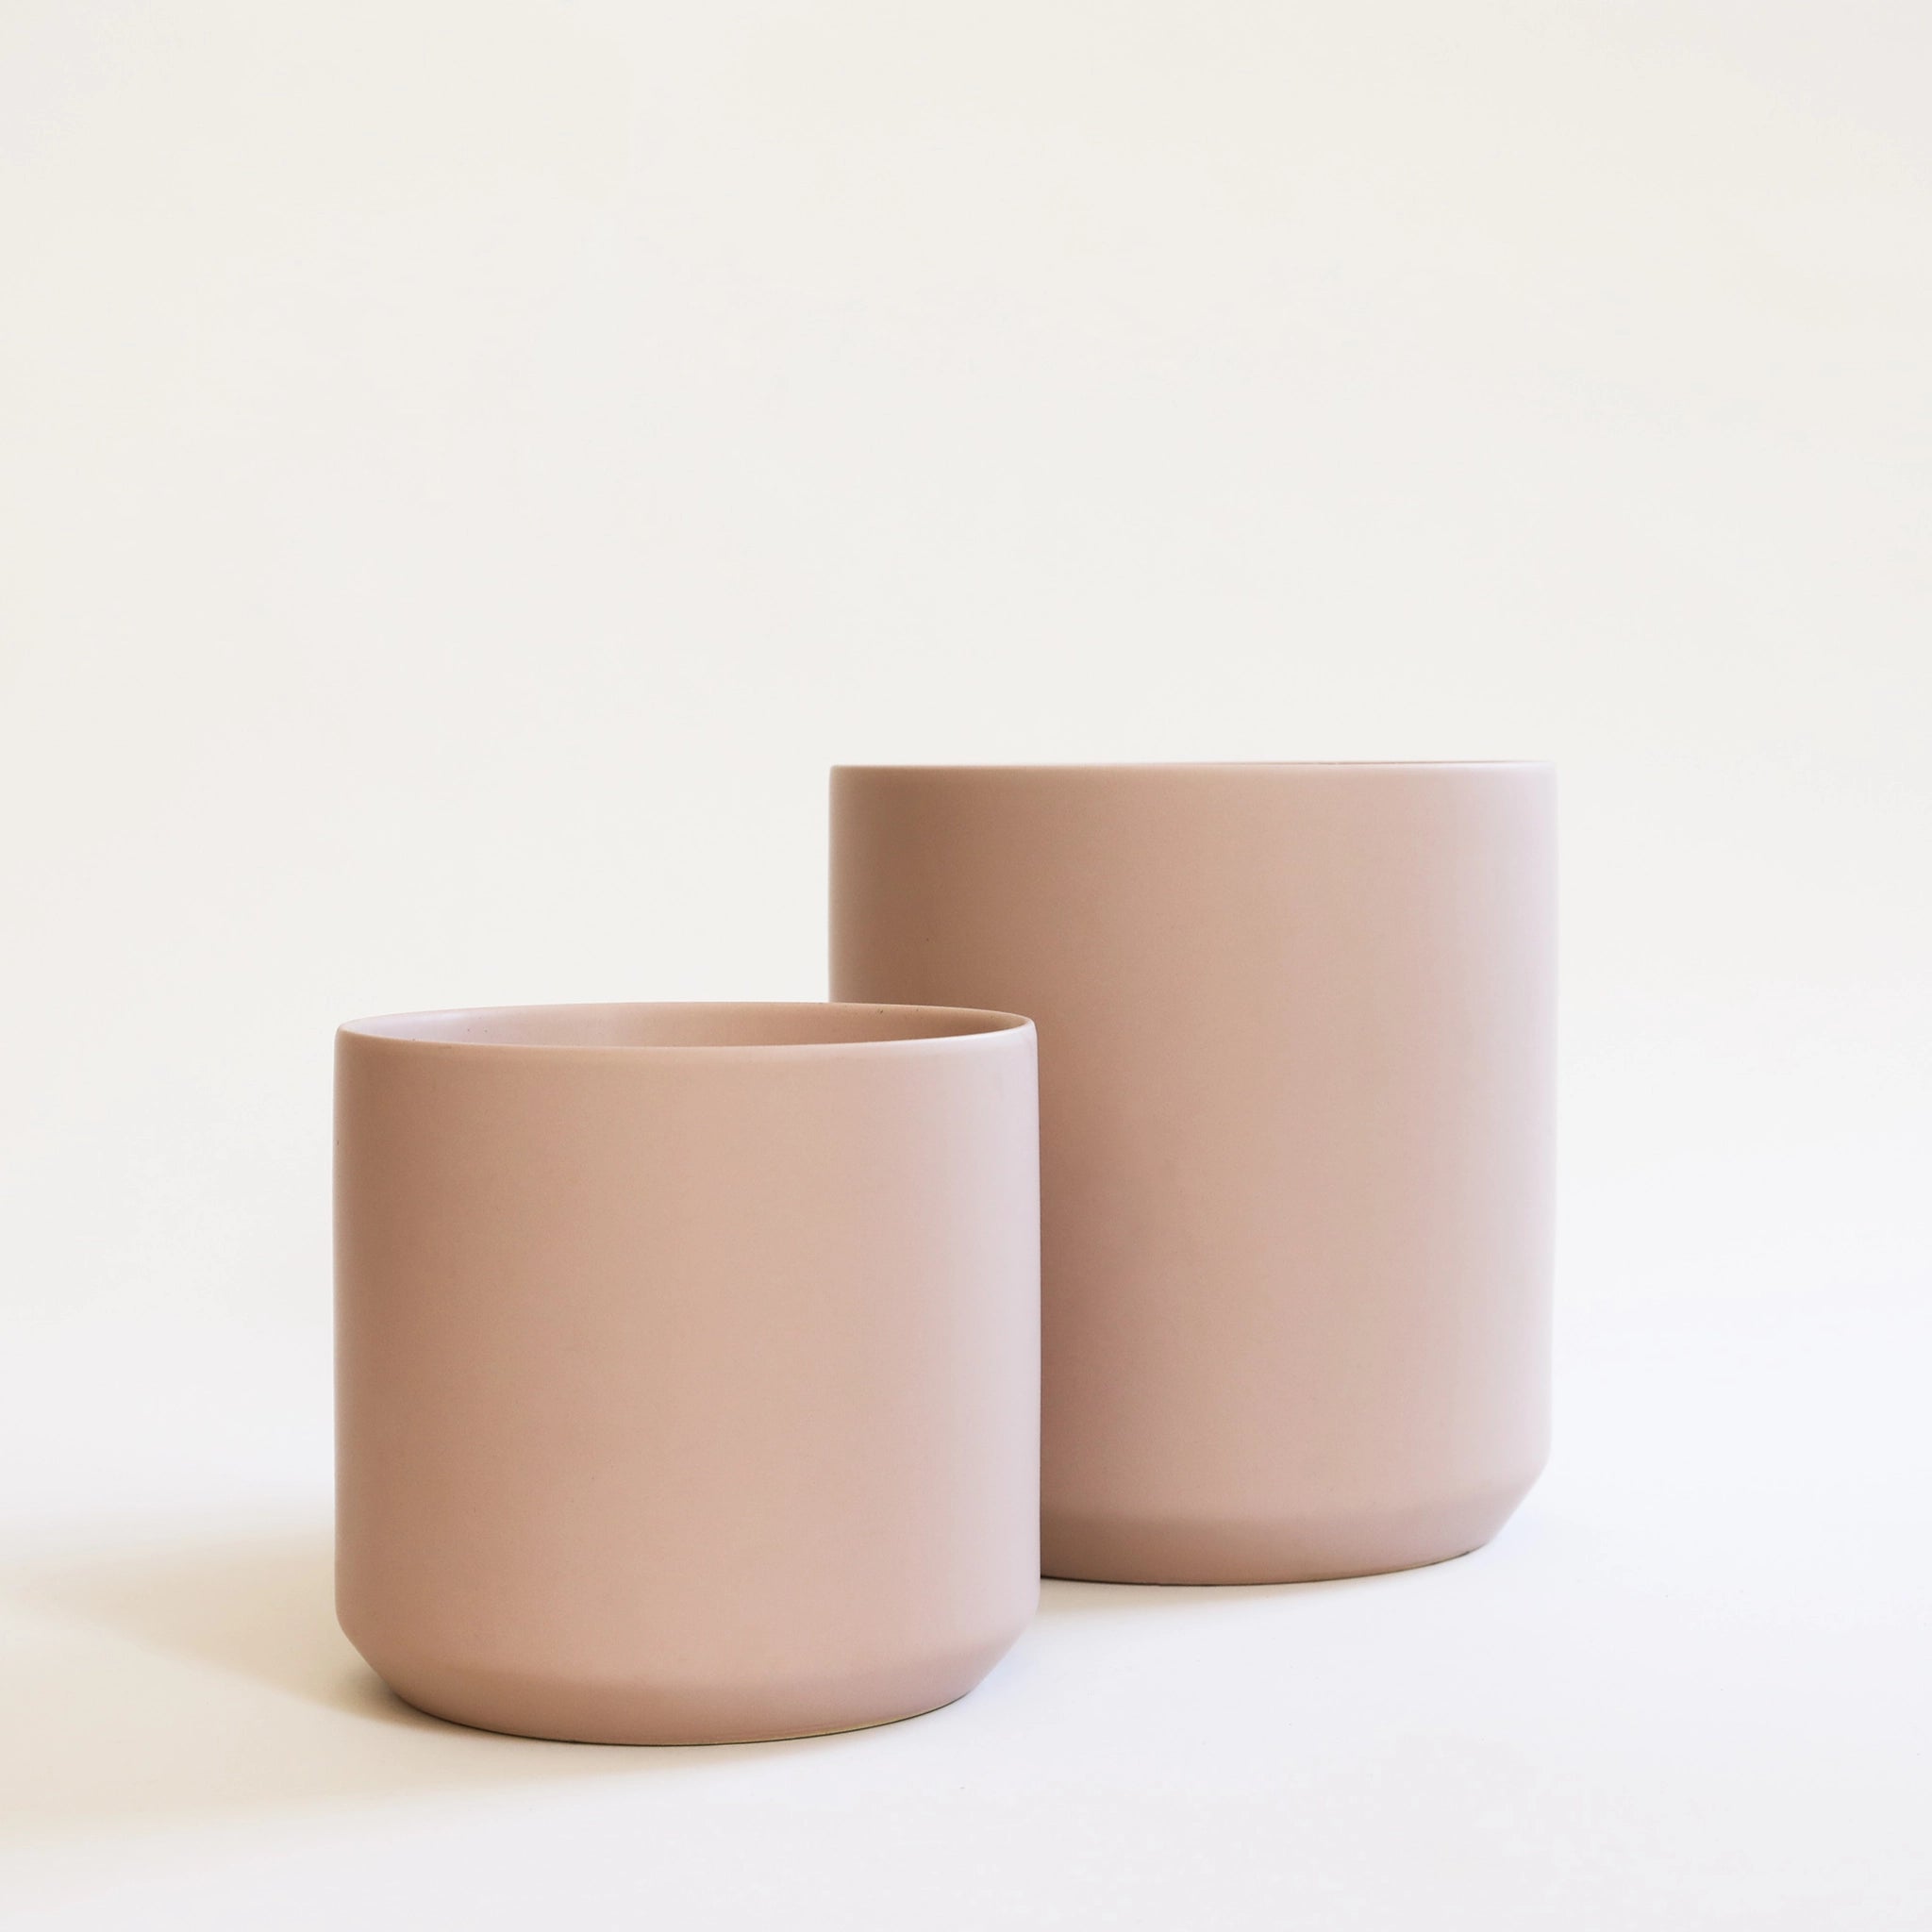 On a cream background is two different sized light pink ceramic planters. 